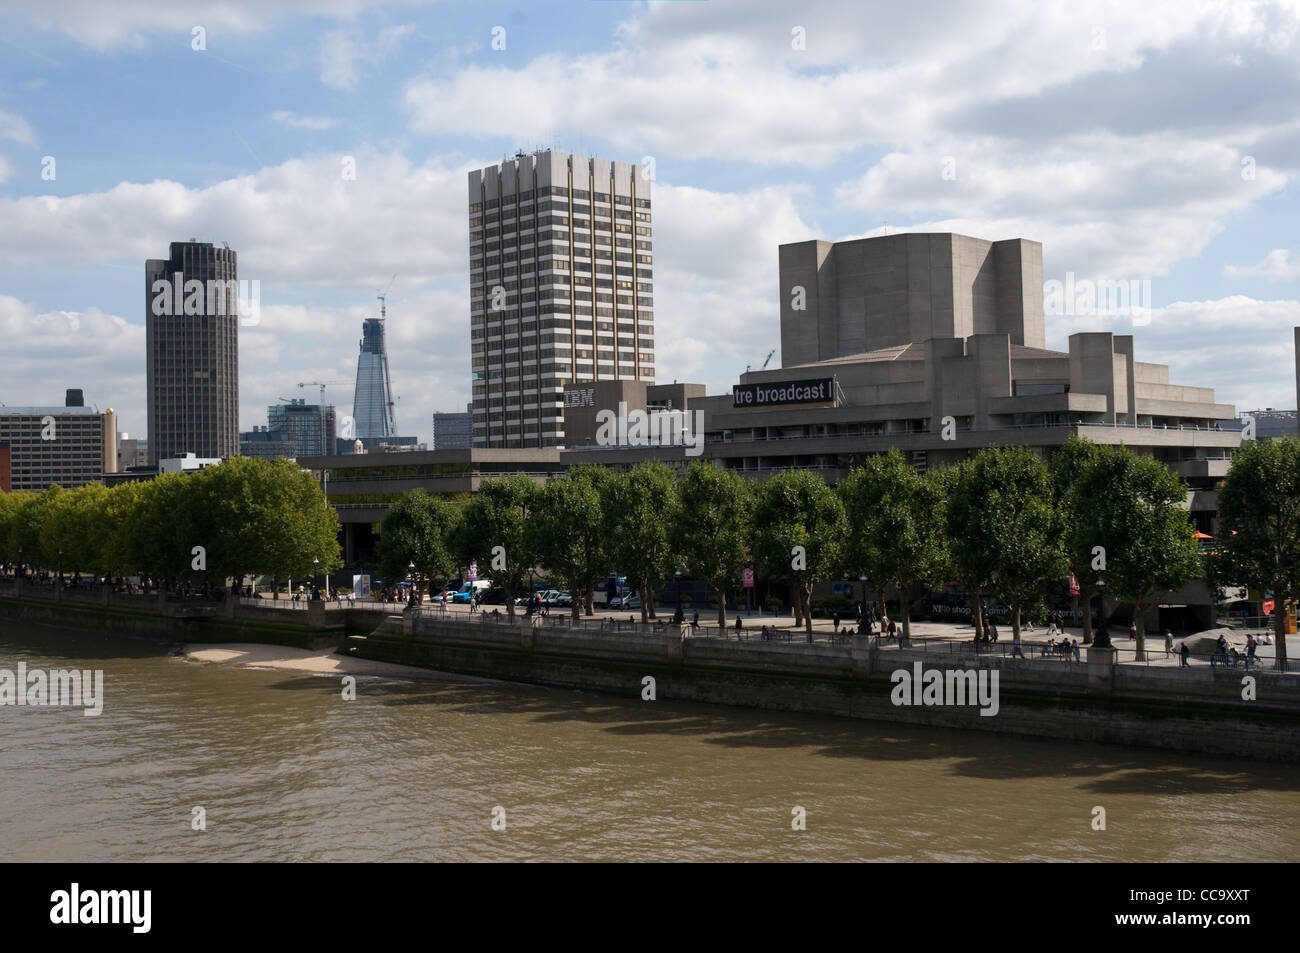 The view from Waterloo bridge towards the south bank of the River Thames. The Royal National theatre is on the right. Stock Photo